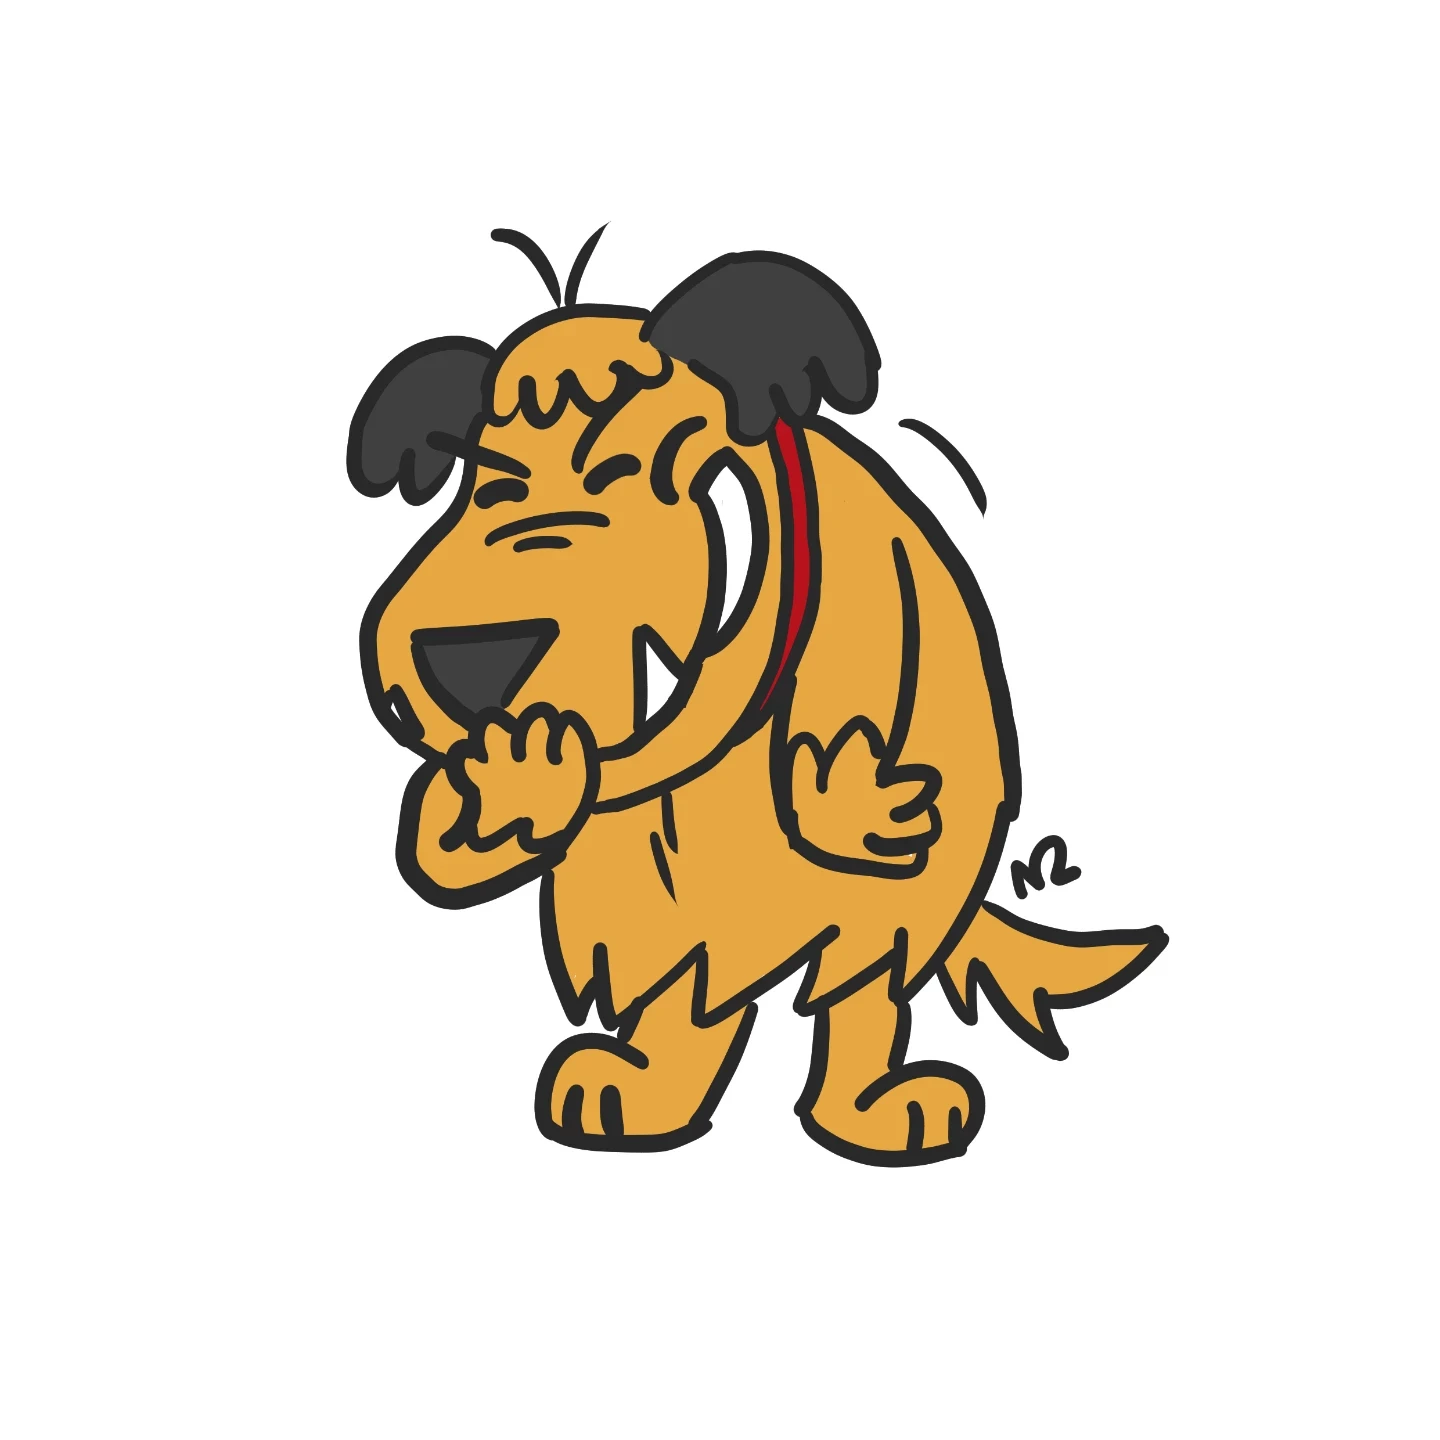 Muttley, a mixed breed dog with yellow fur and black ears, wheezing